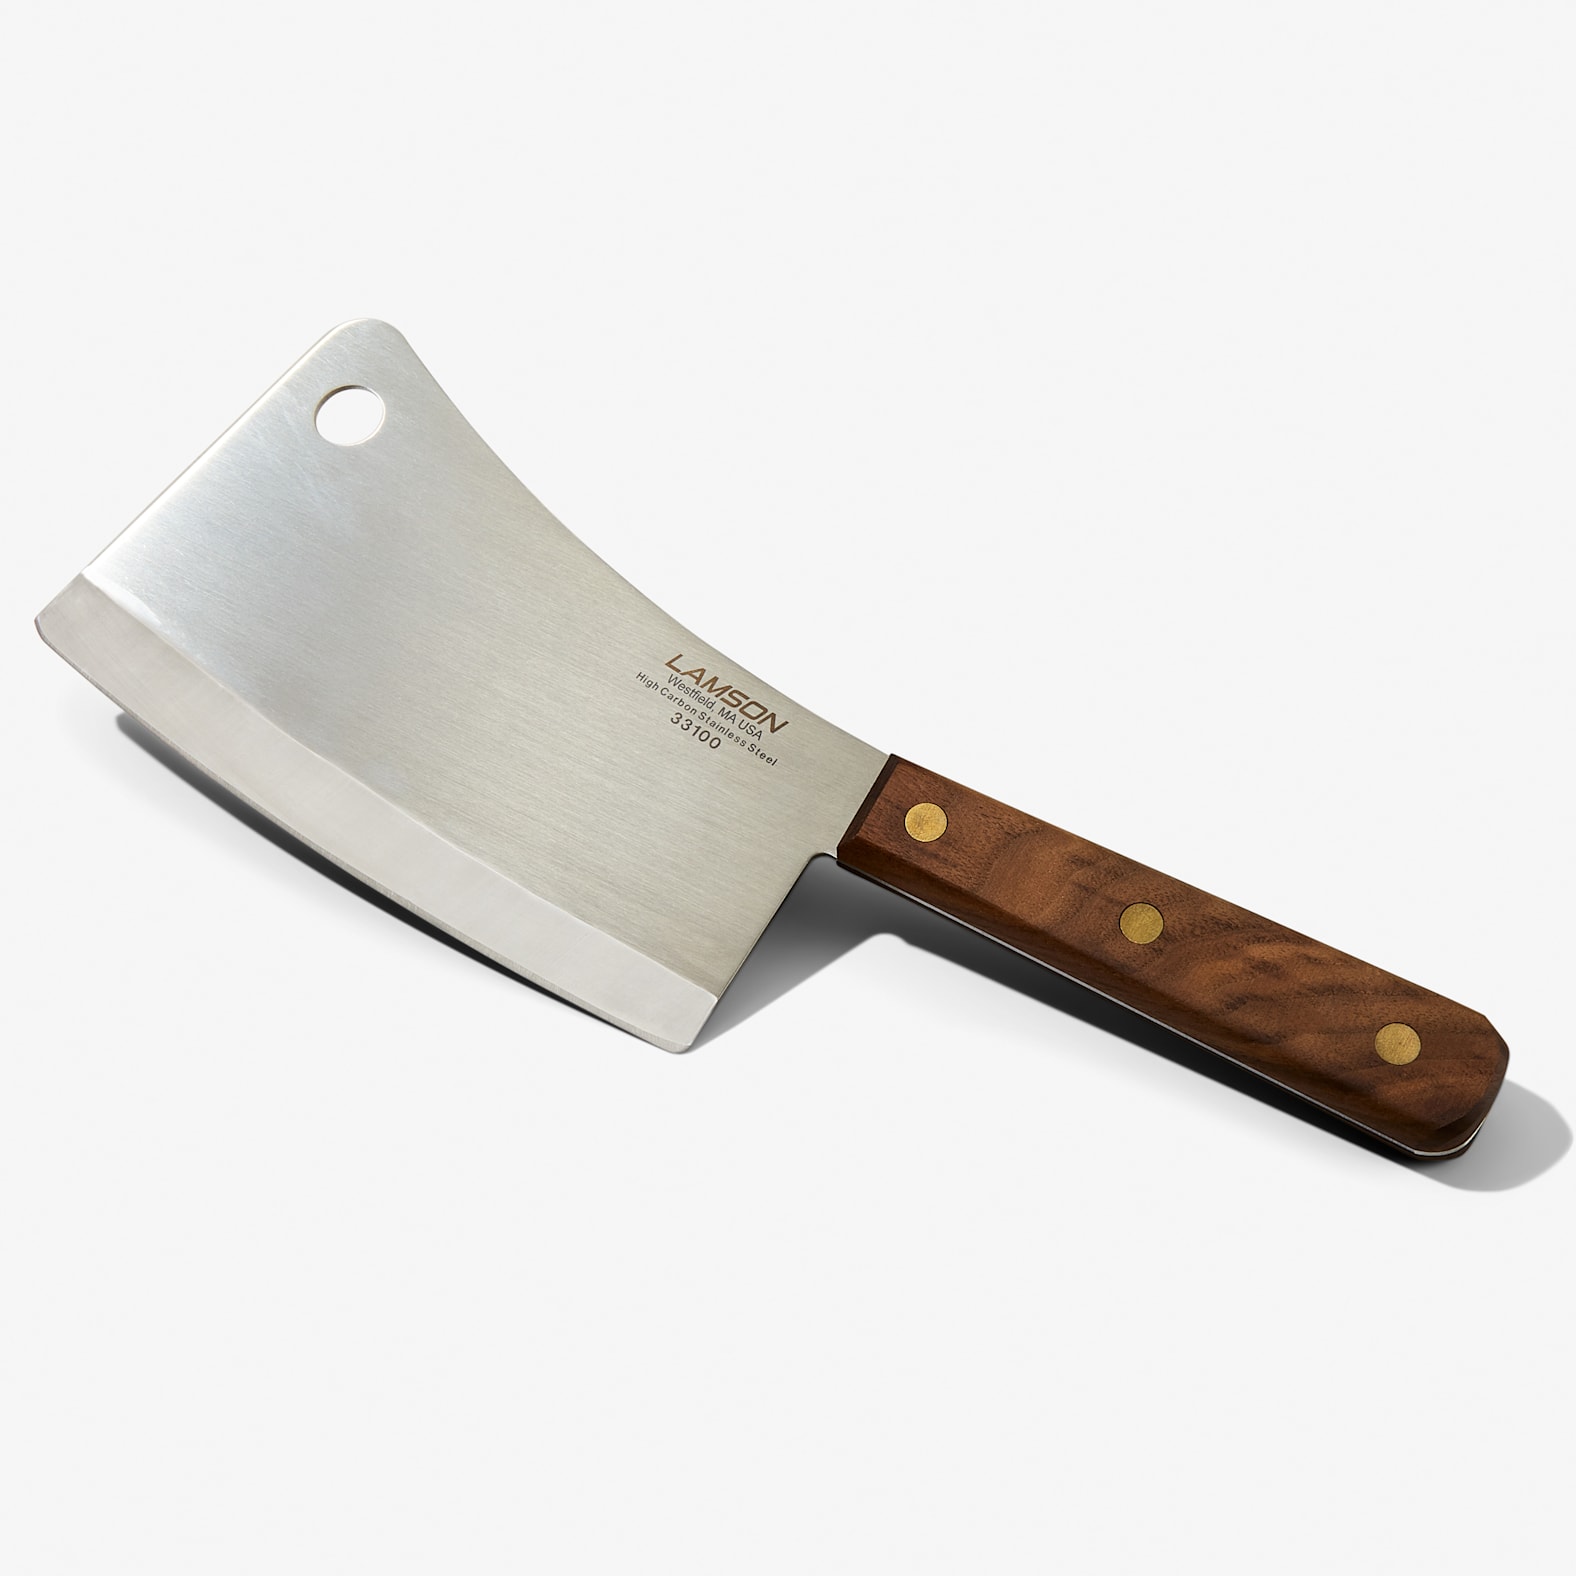 https://dam.bespokepost.com/image/upload/c_limit%2Cdpr_2.0%2Cf_auto%2Cq_auto%2Cw_788/v1/Storefront/2023/submission/migration/lamson-meat-cleaver-walnut-handle4